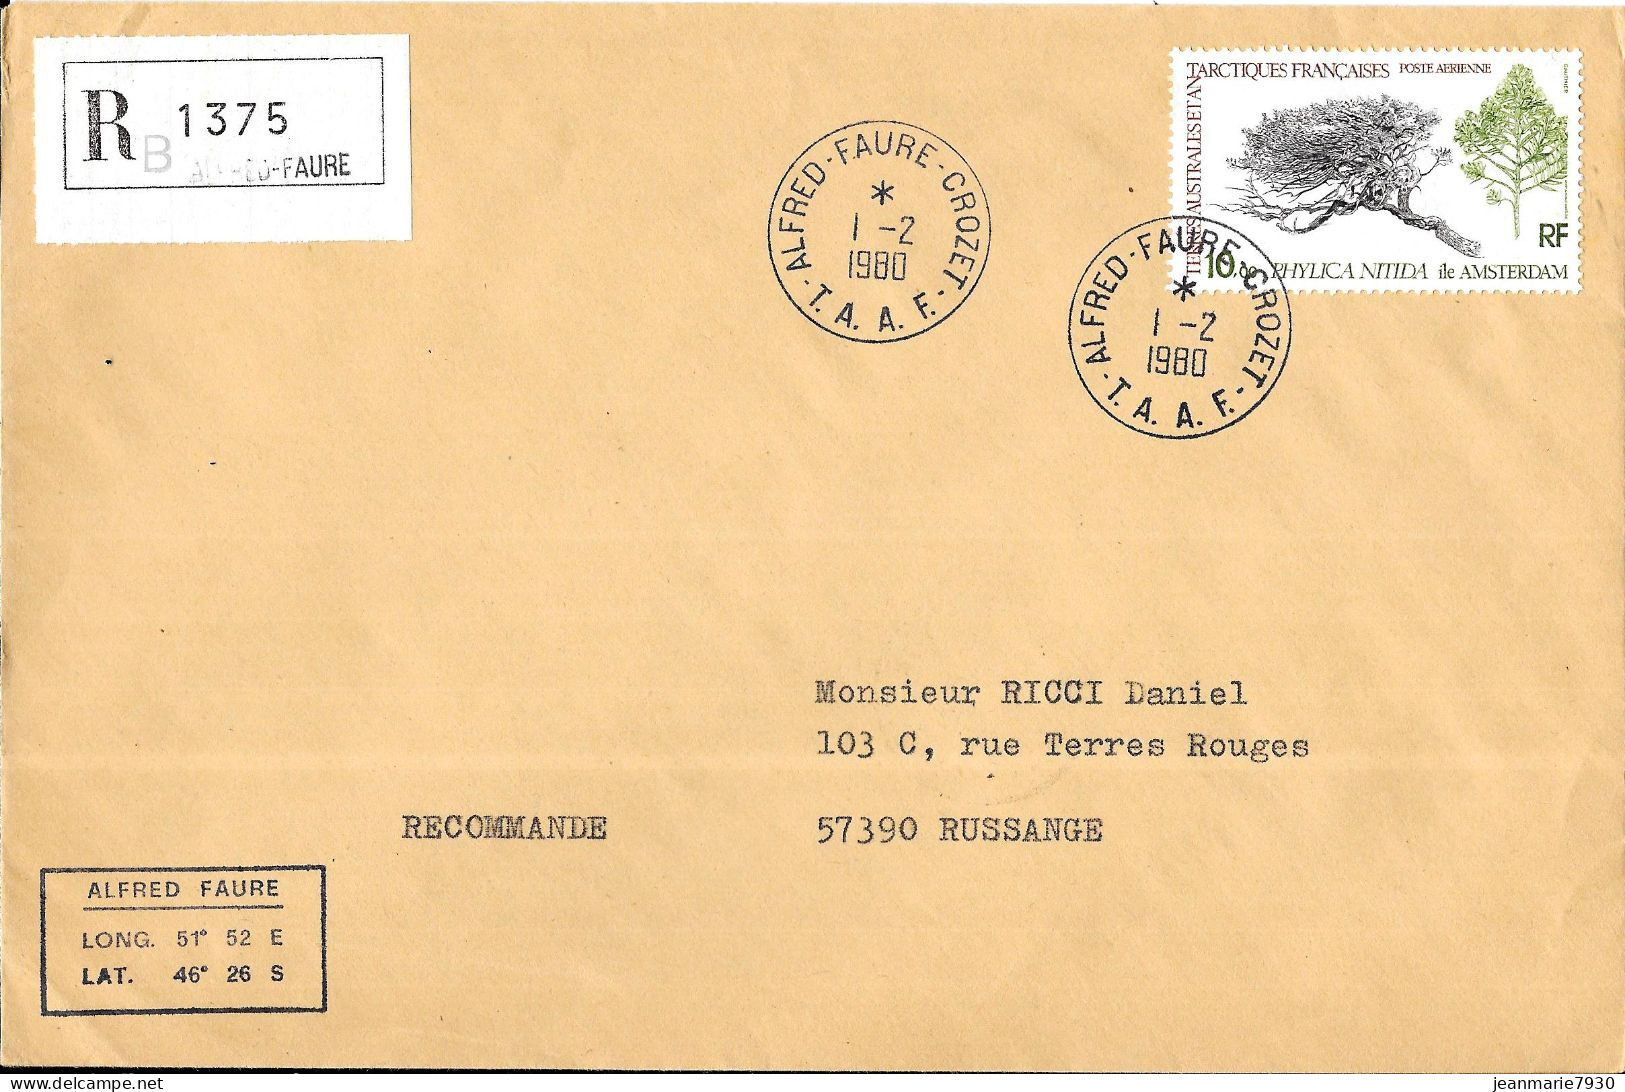 M137 - T.A.A.F - LETTRE RECOMMANDEE LOCALISEE DE ALFRED FAURE CROZET DU 01/02/80 - Covers & Documents